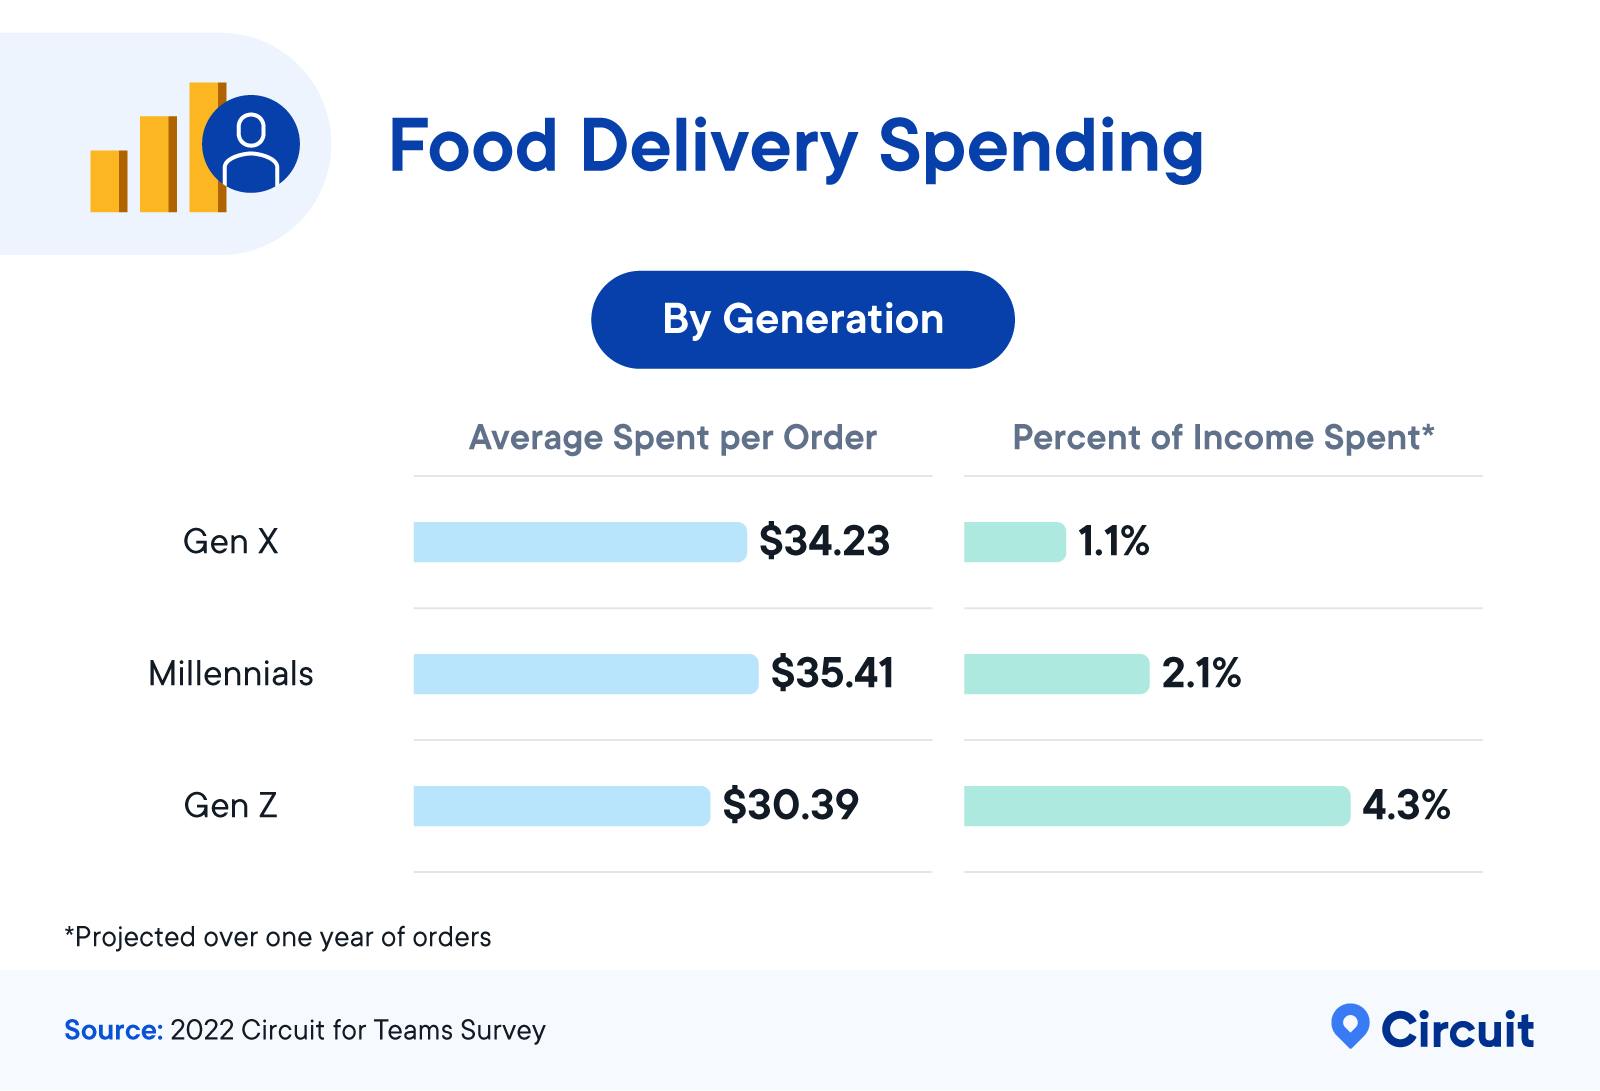 Food Delivery Spending by Generation